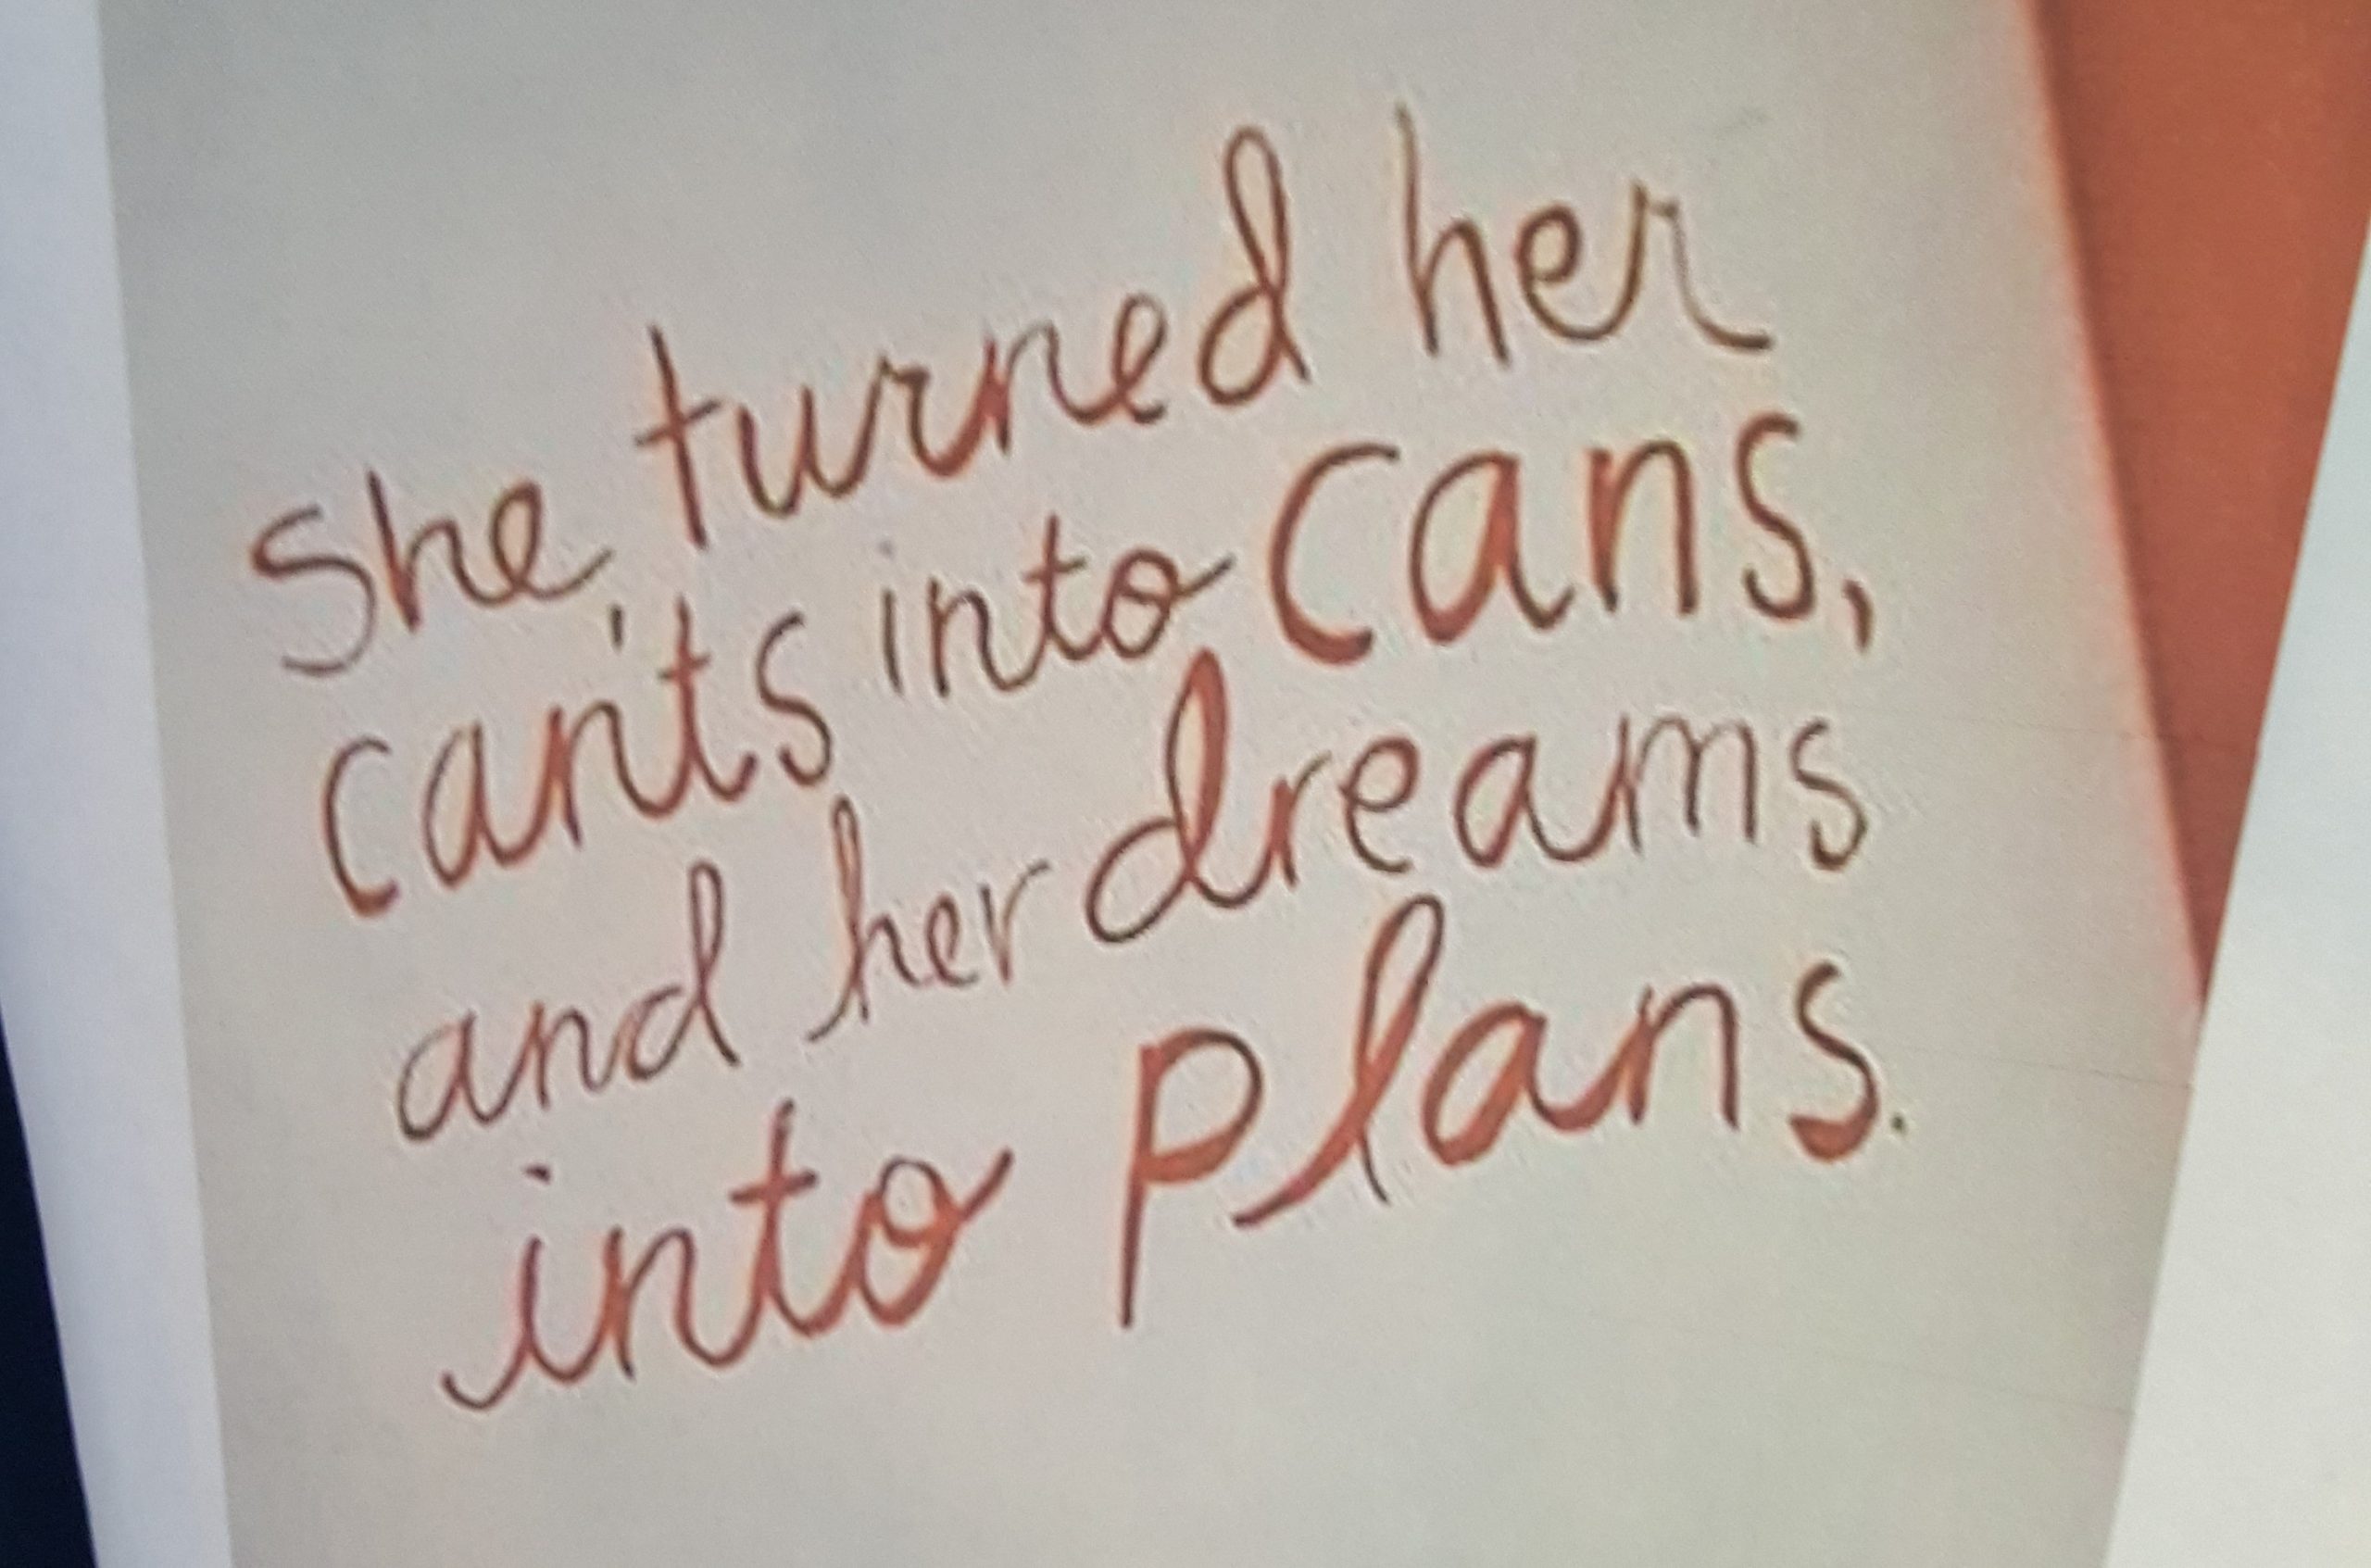 She turned her can'ts into cans and her dreams into plans.